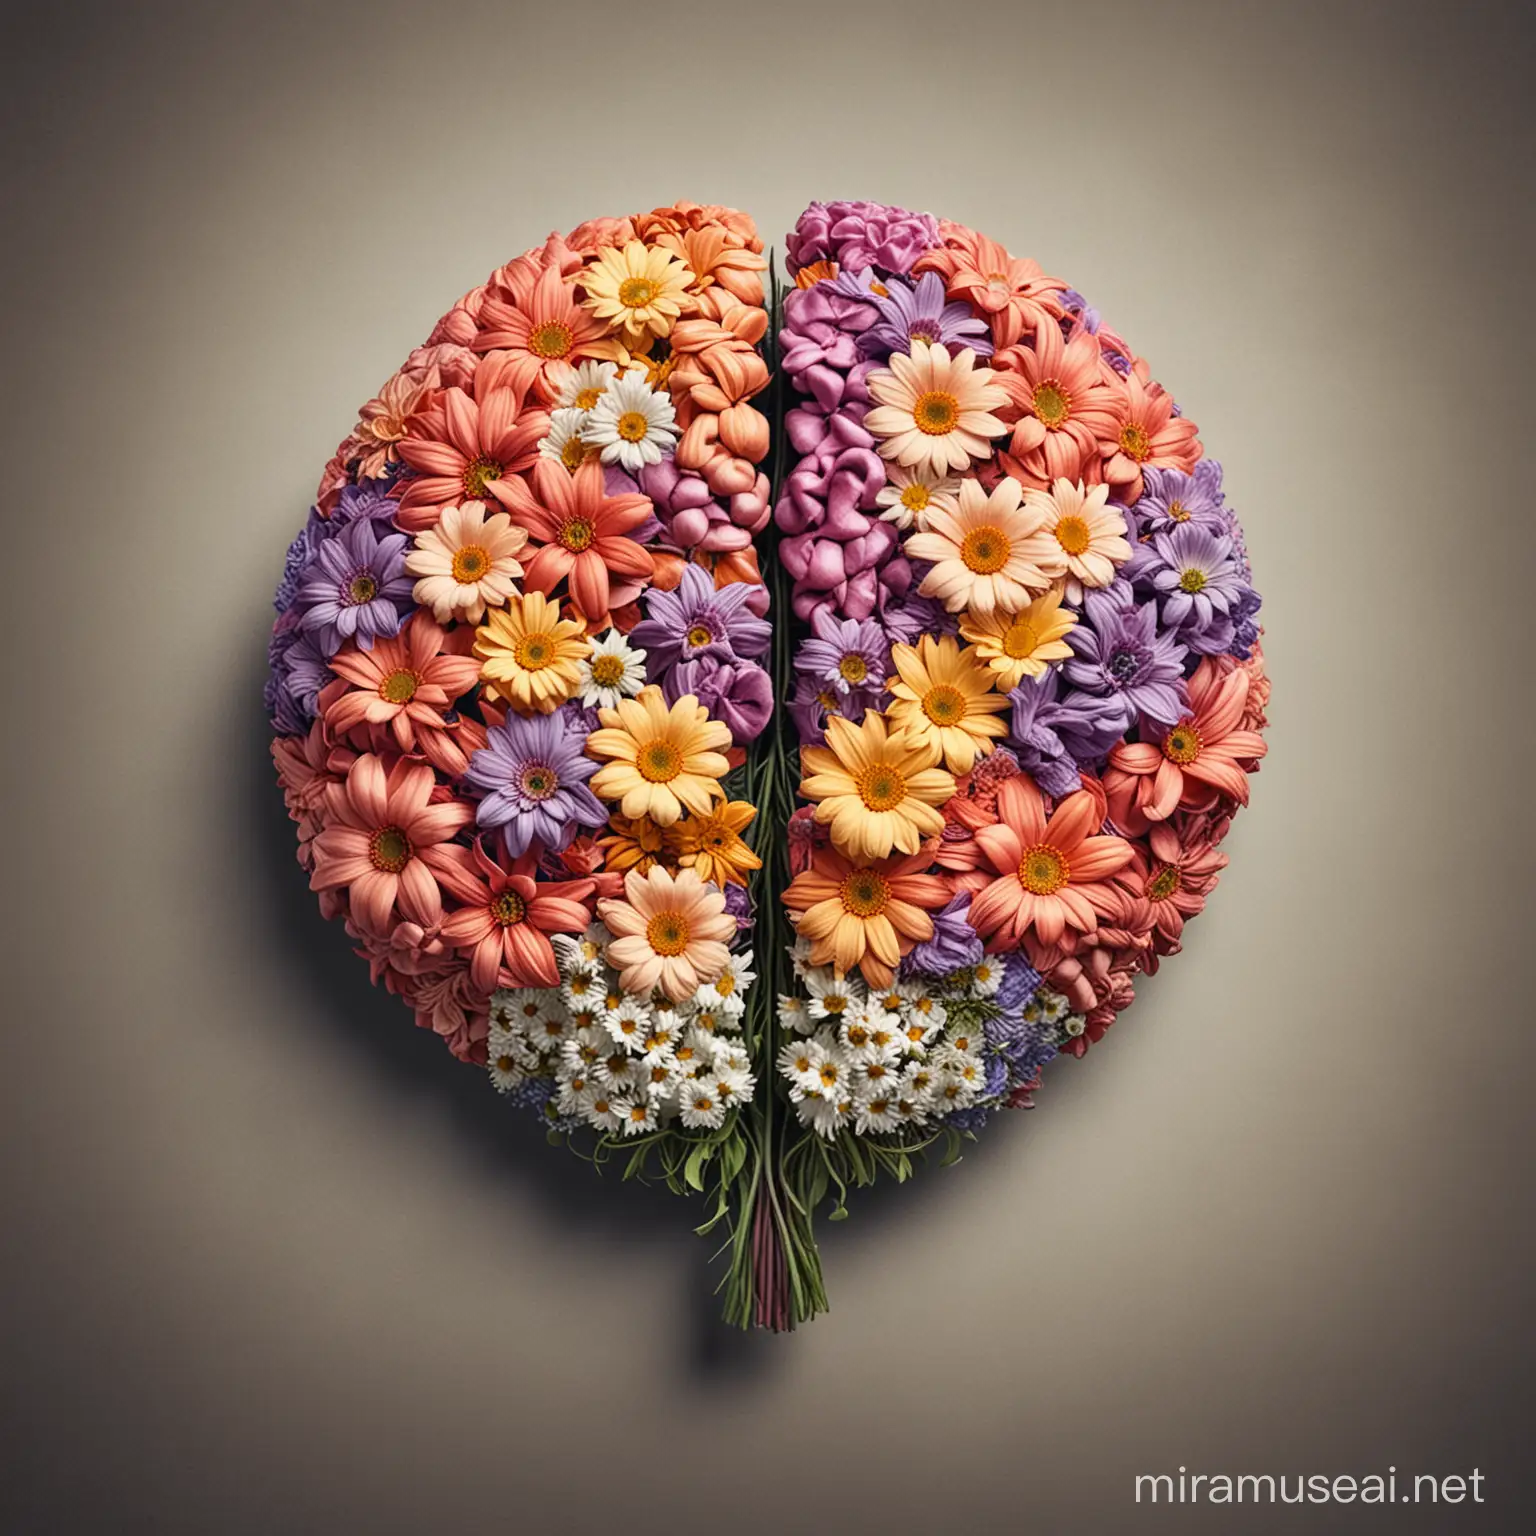 Floral Brain Sculpture with Blooming Flowers